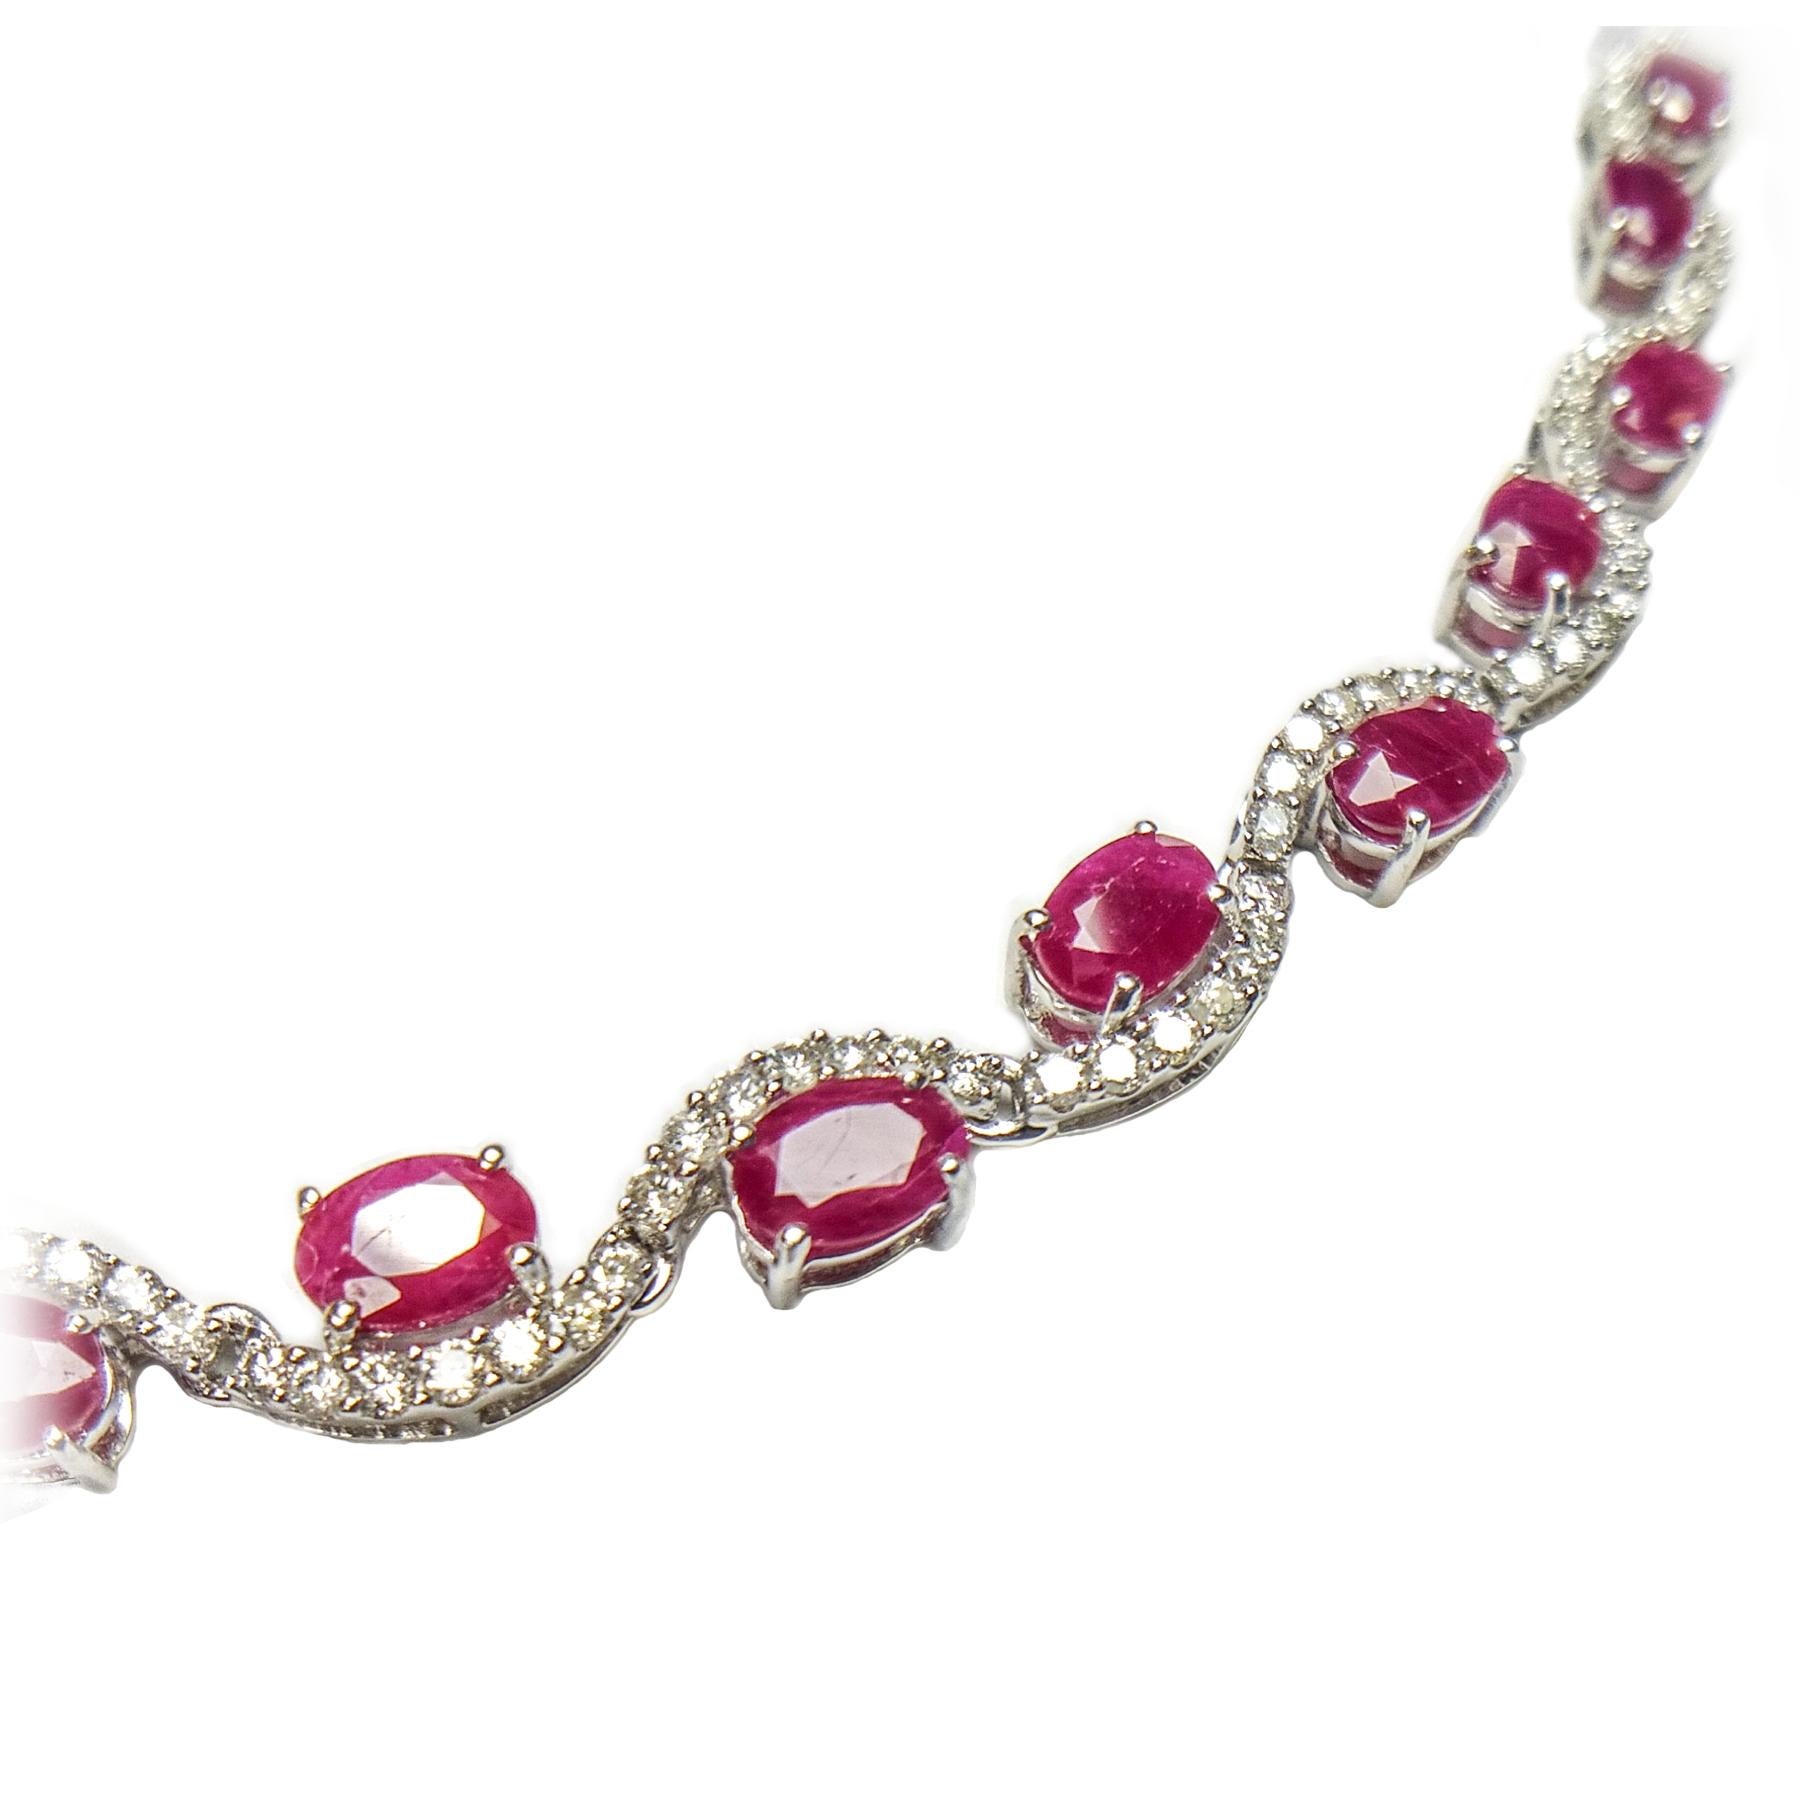 Contemporary 23.04 Carat Ruby Diamond White Gold Necklace